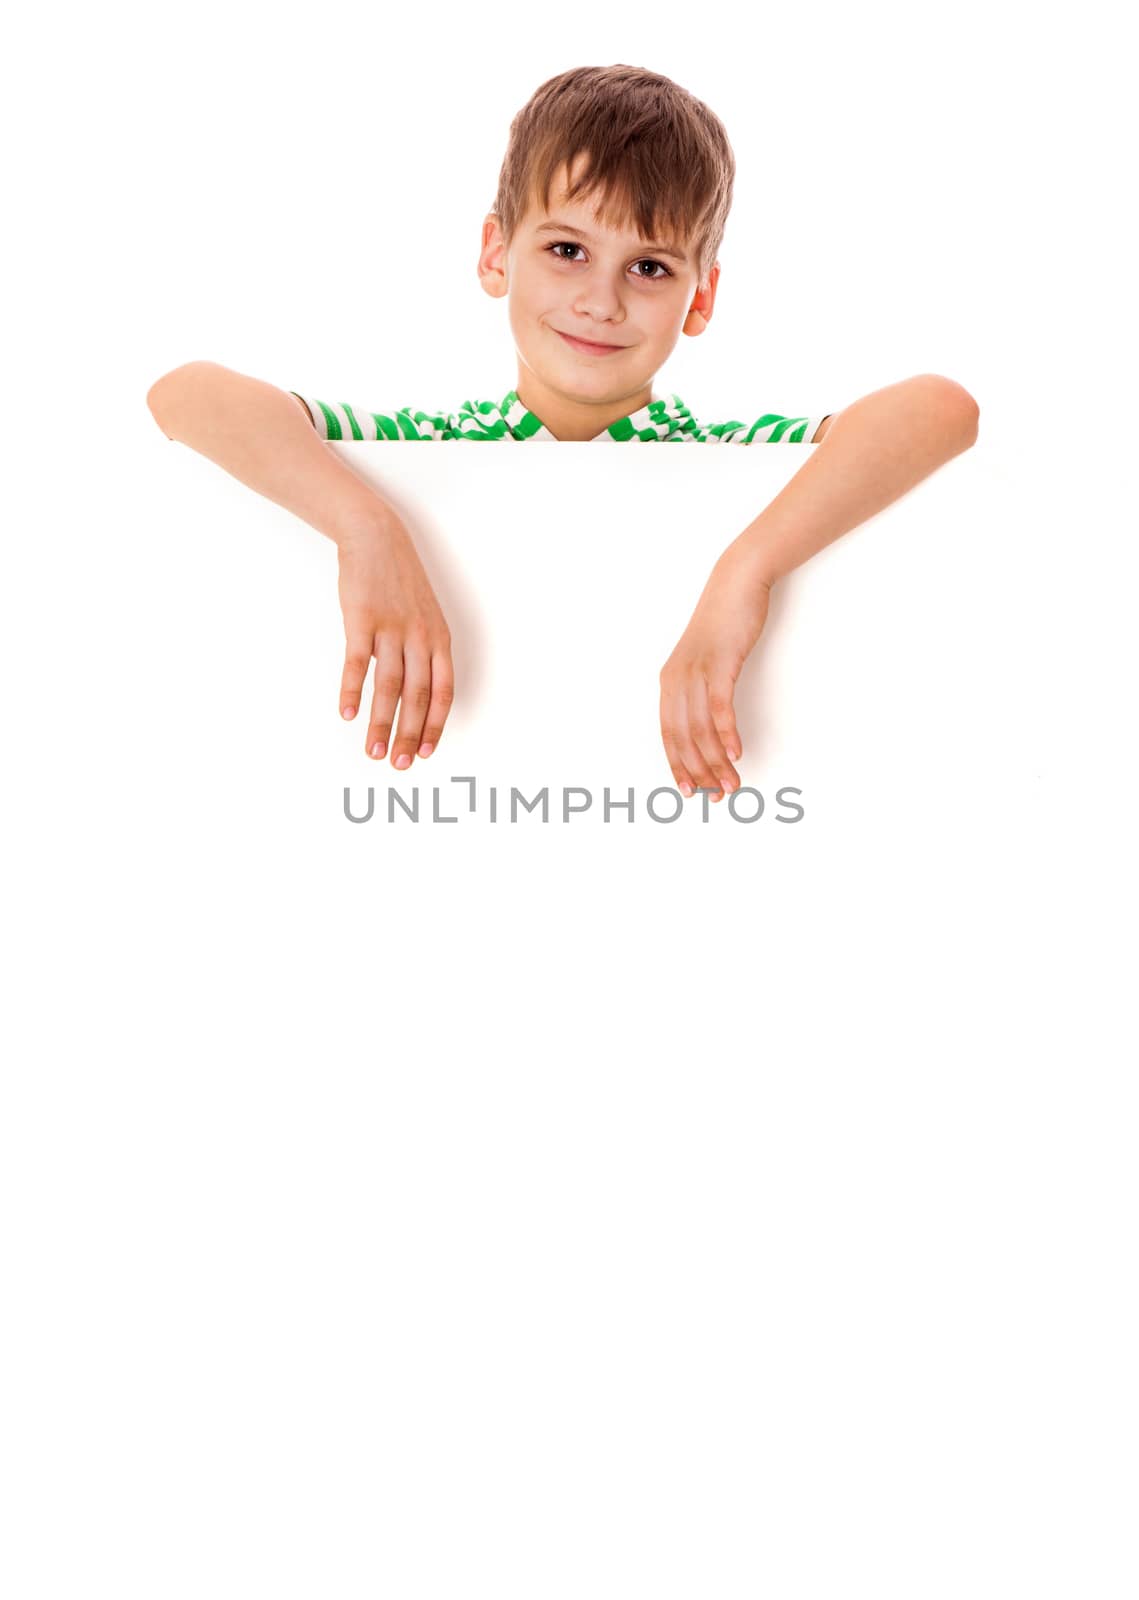 Boy holding a banner isolated on white background